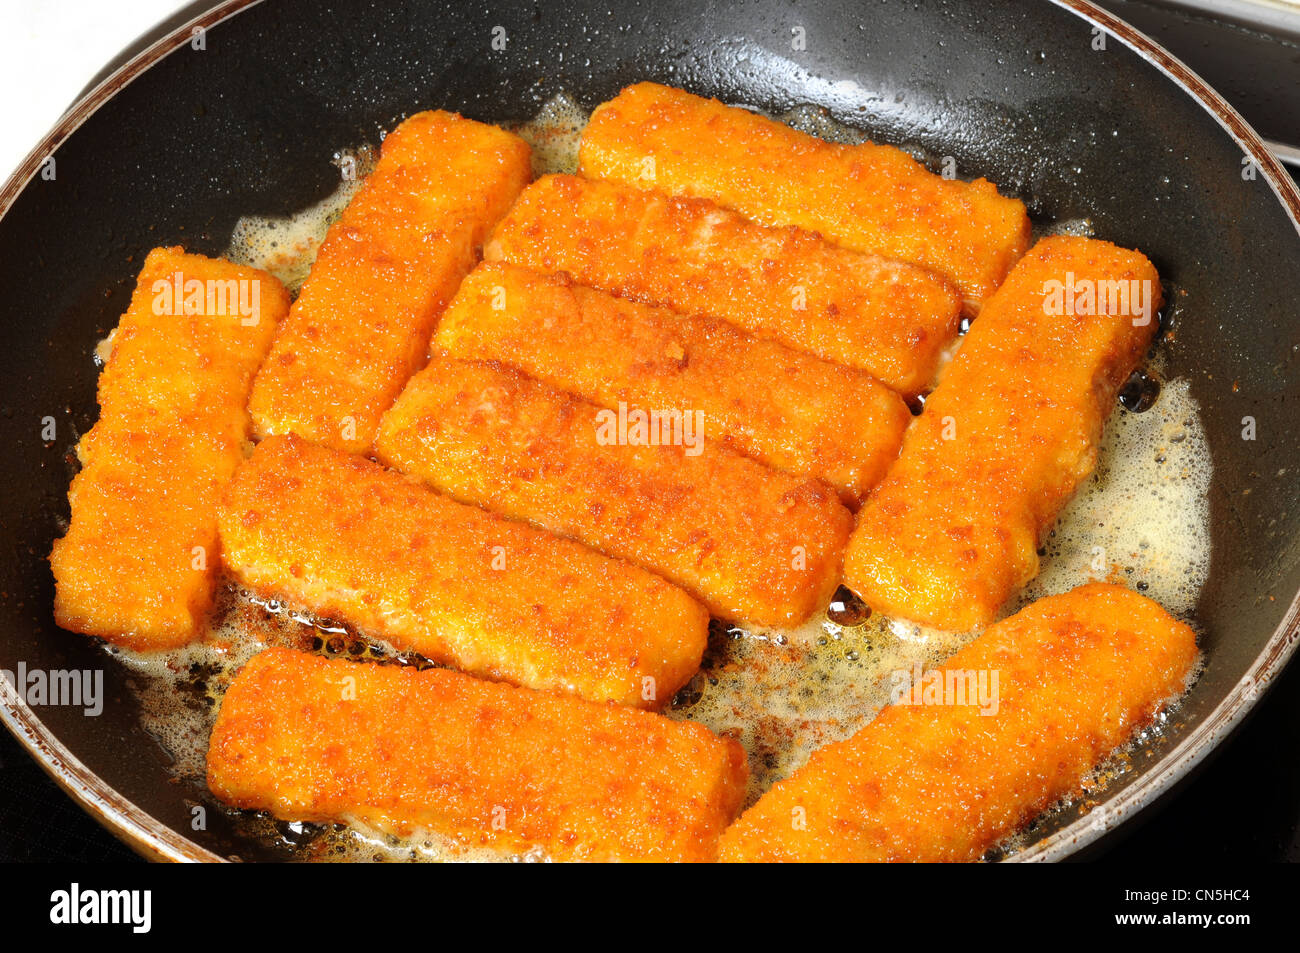 Fish Fingers In A Frying Pan Stock Photo Alamy